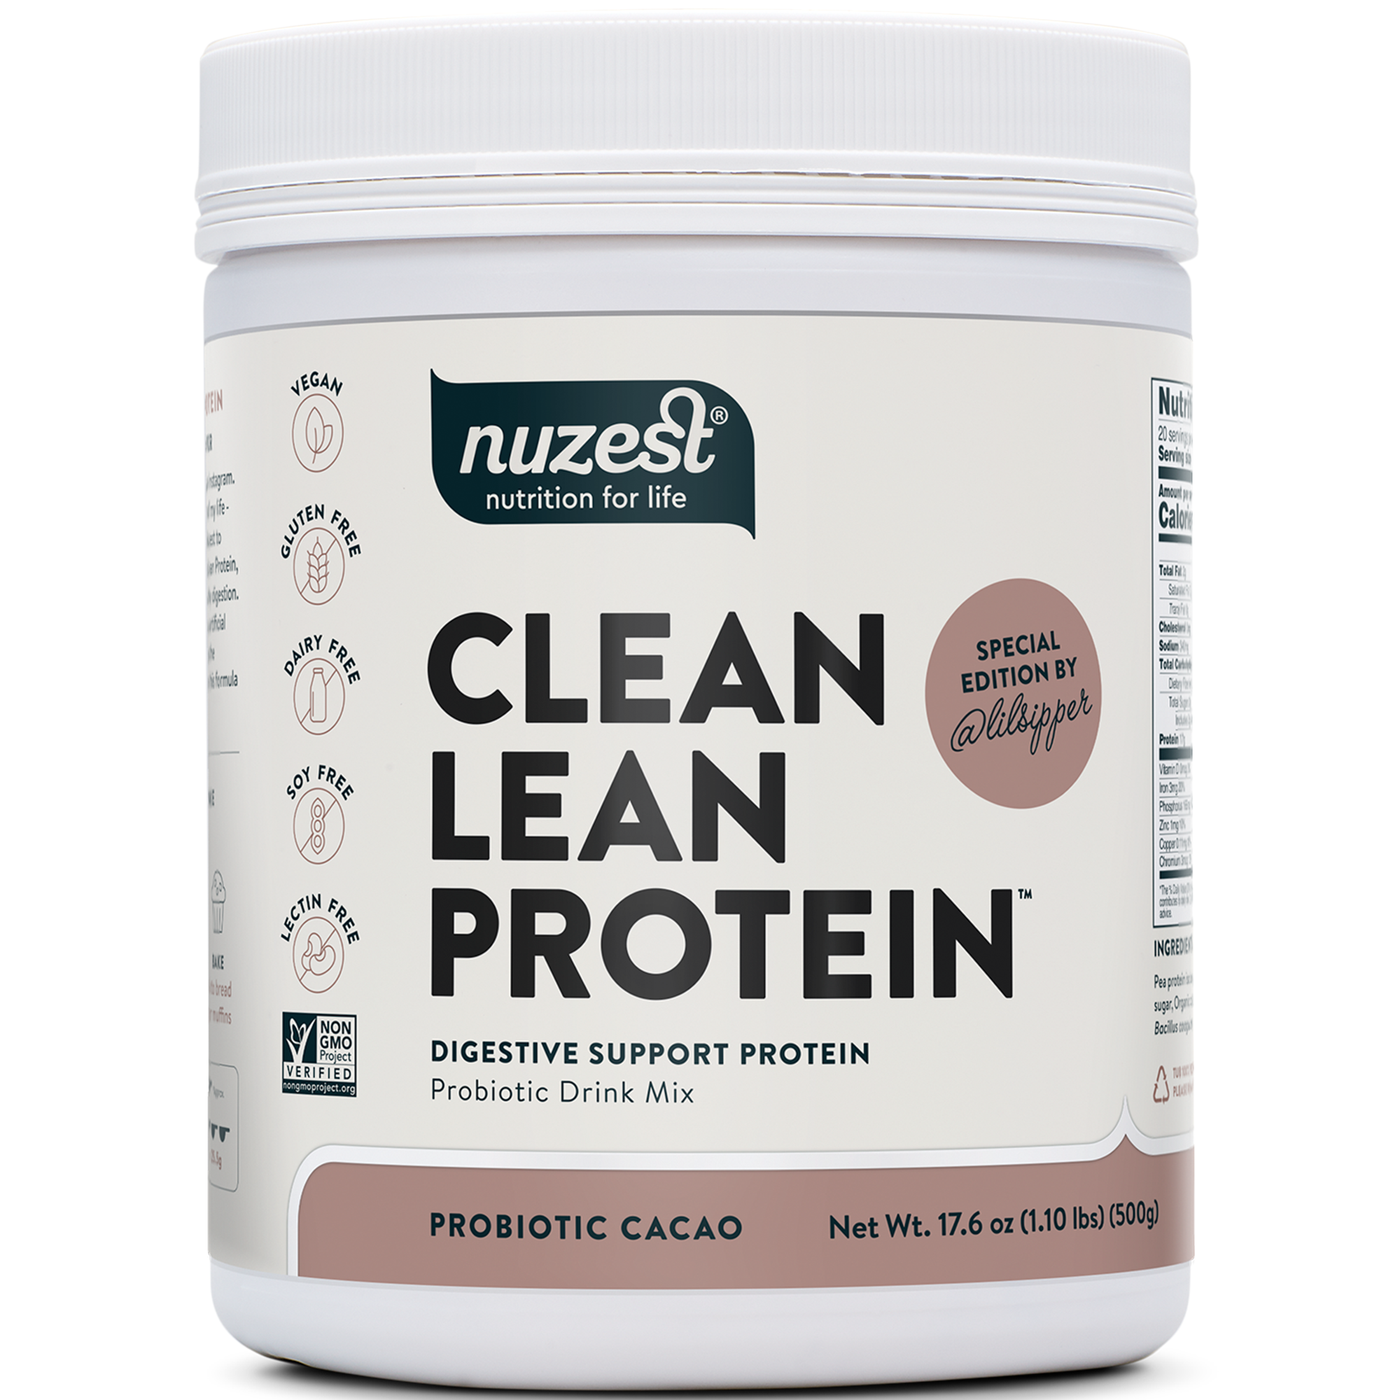 Clean Lean Prot Probio Cacao  Curated Wellness